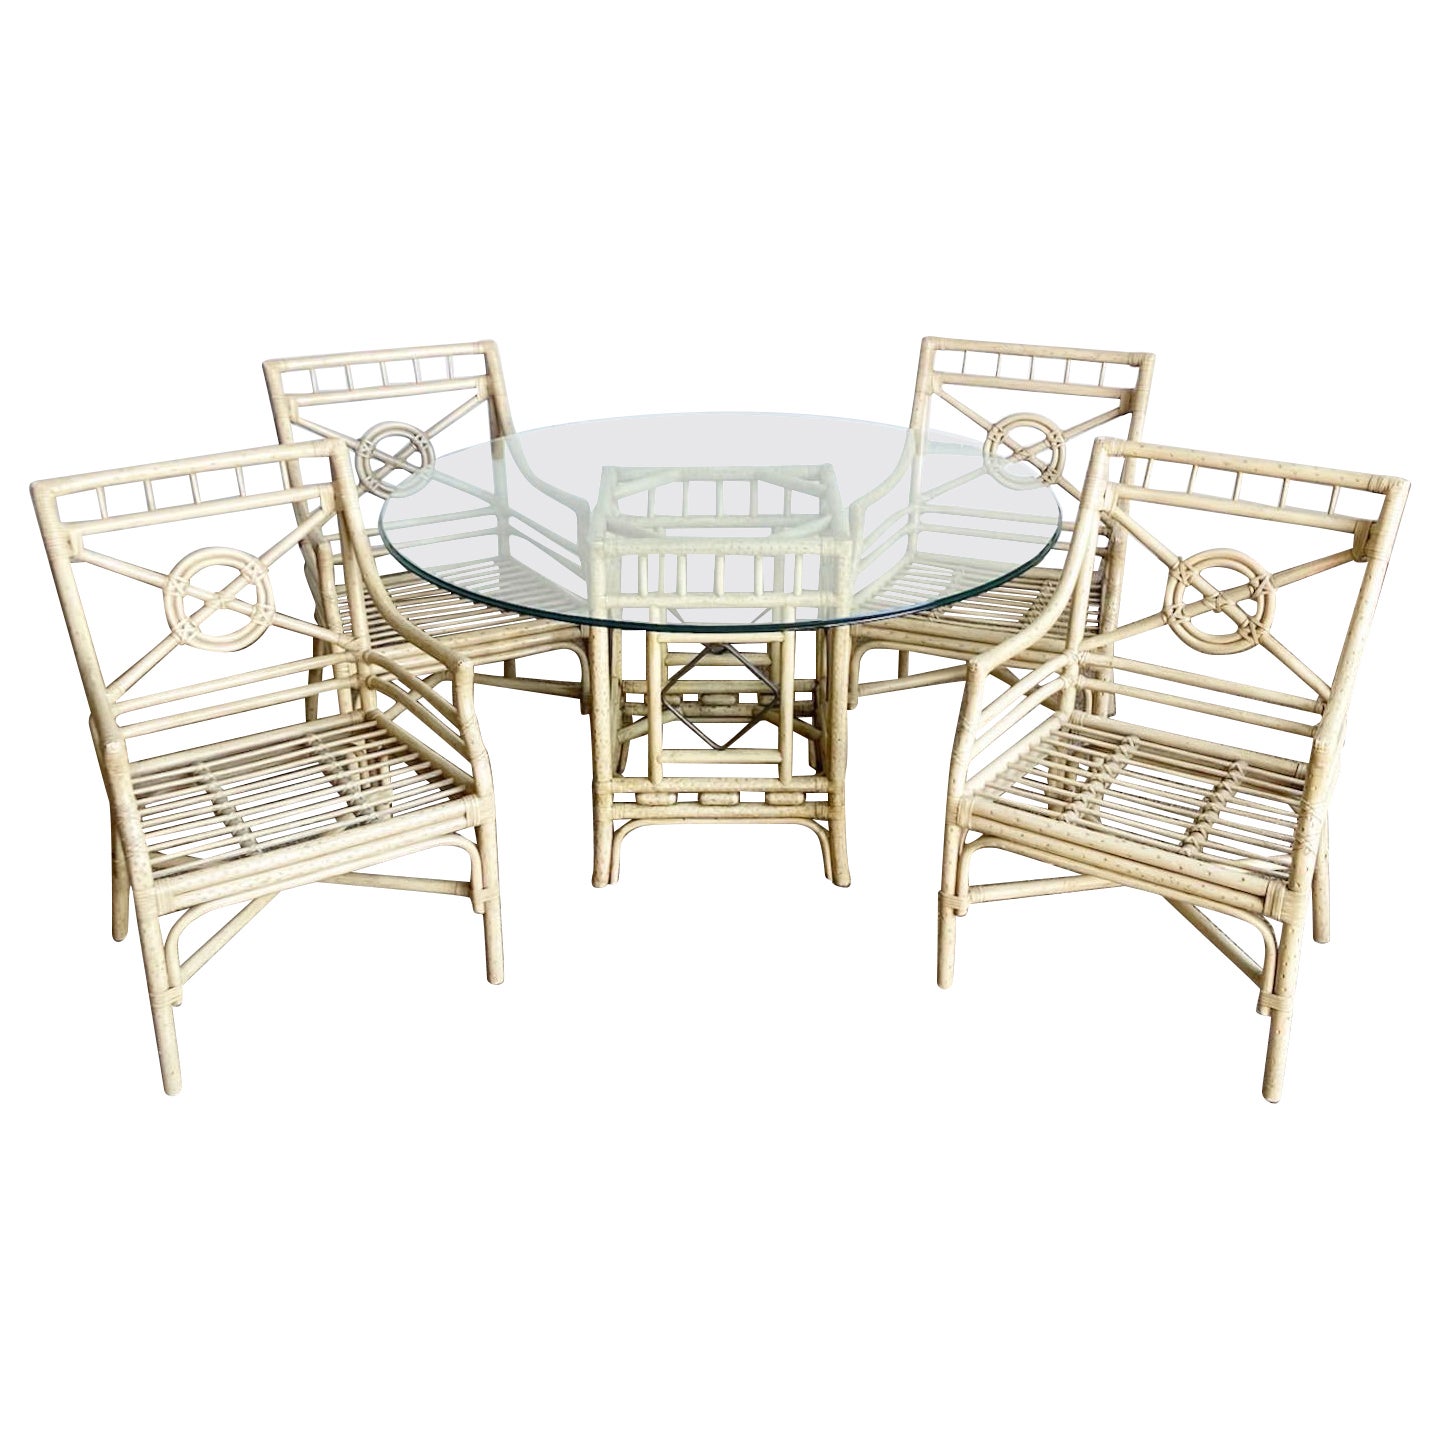 Boho Chic McGuire Style Target Back Bamboo Rattan Dining Set - 5 Pieces